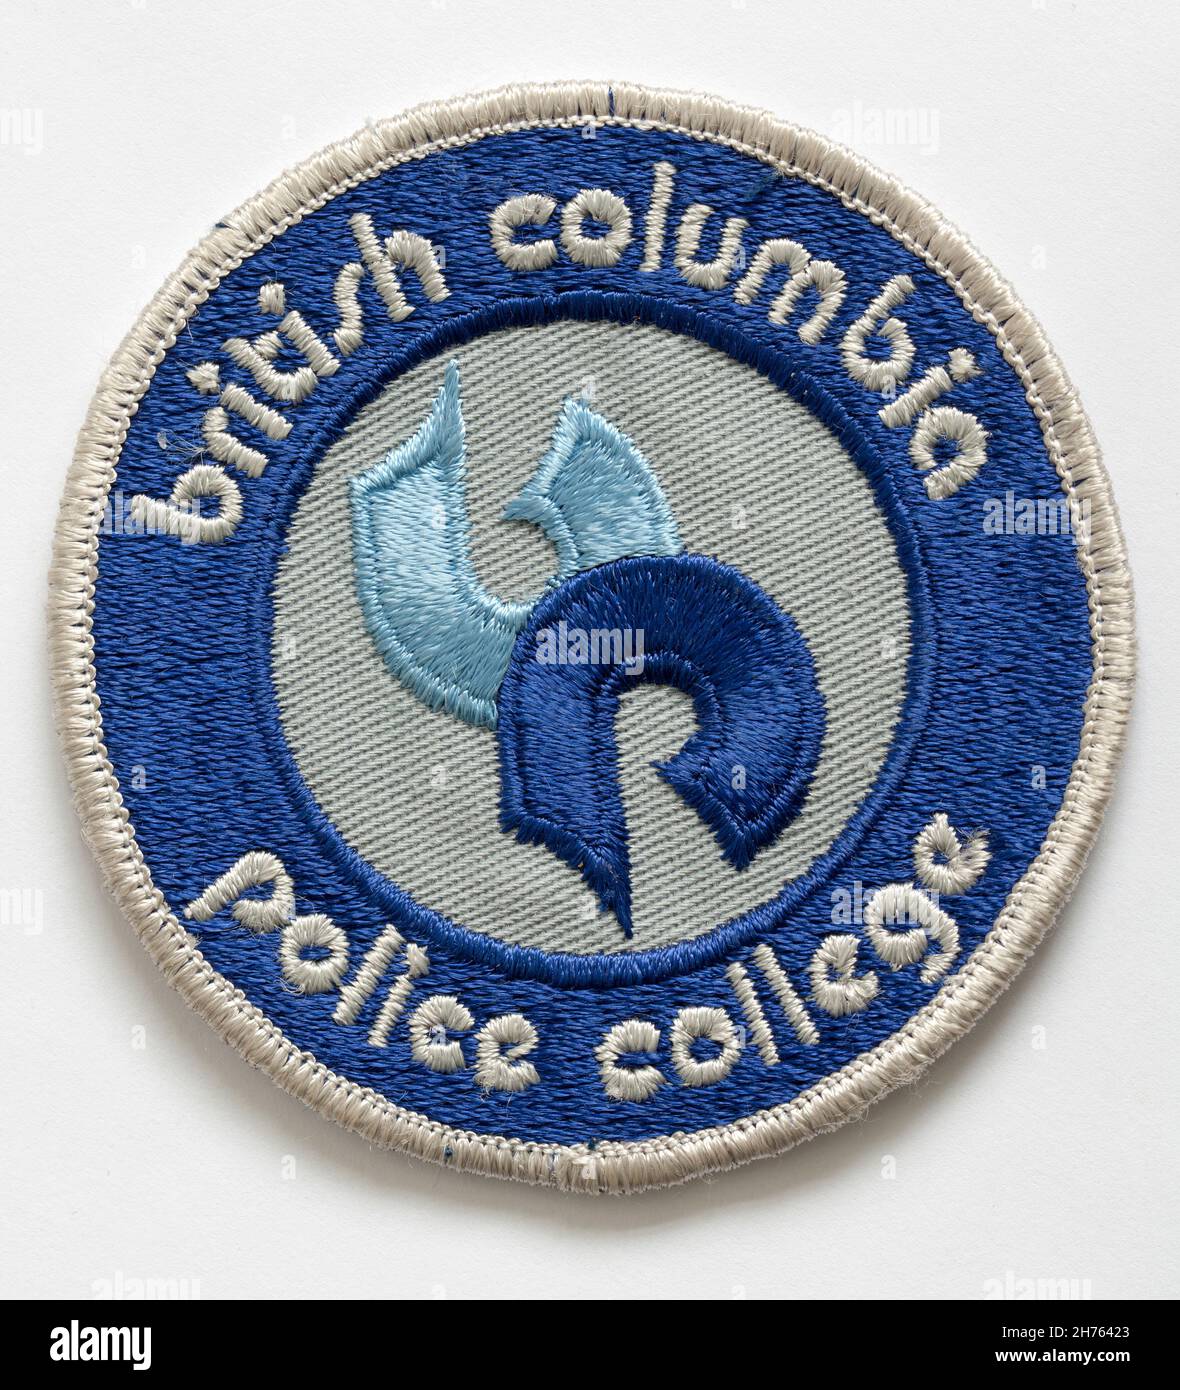 British Colombia Police Abzeichen Patch Stockfoto